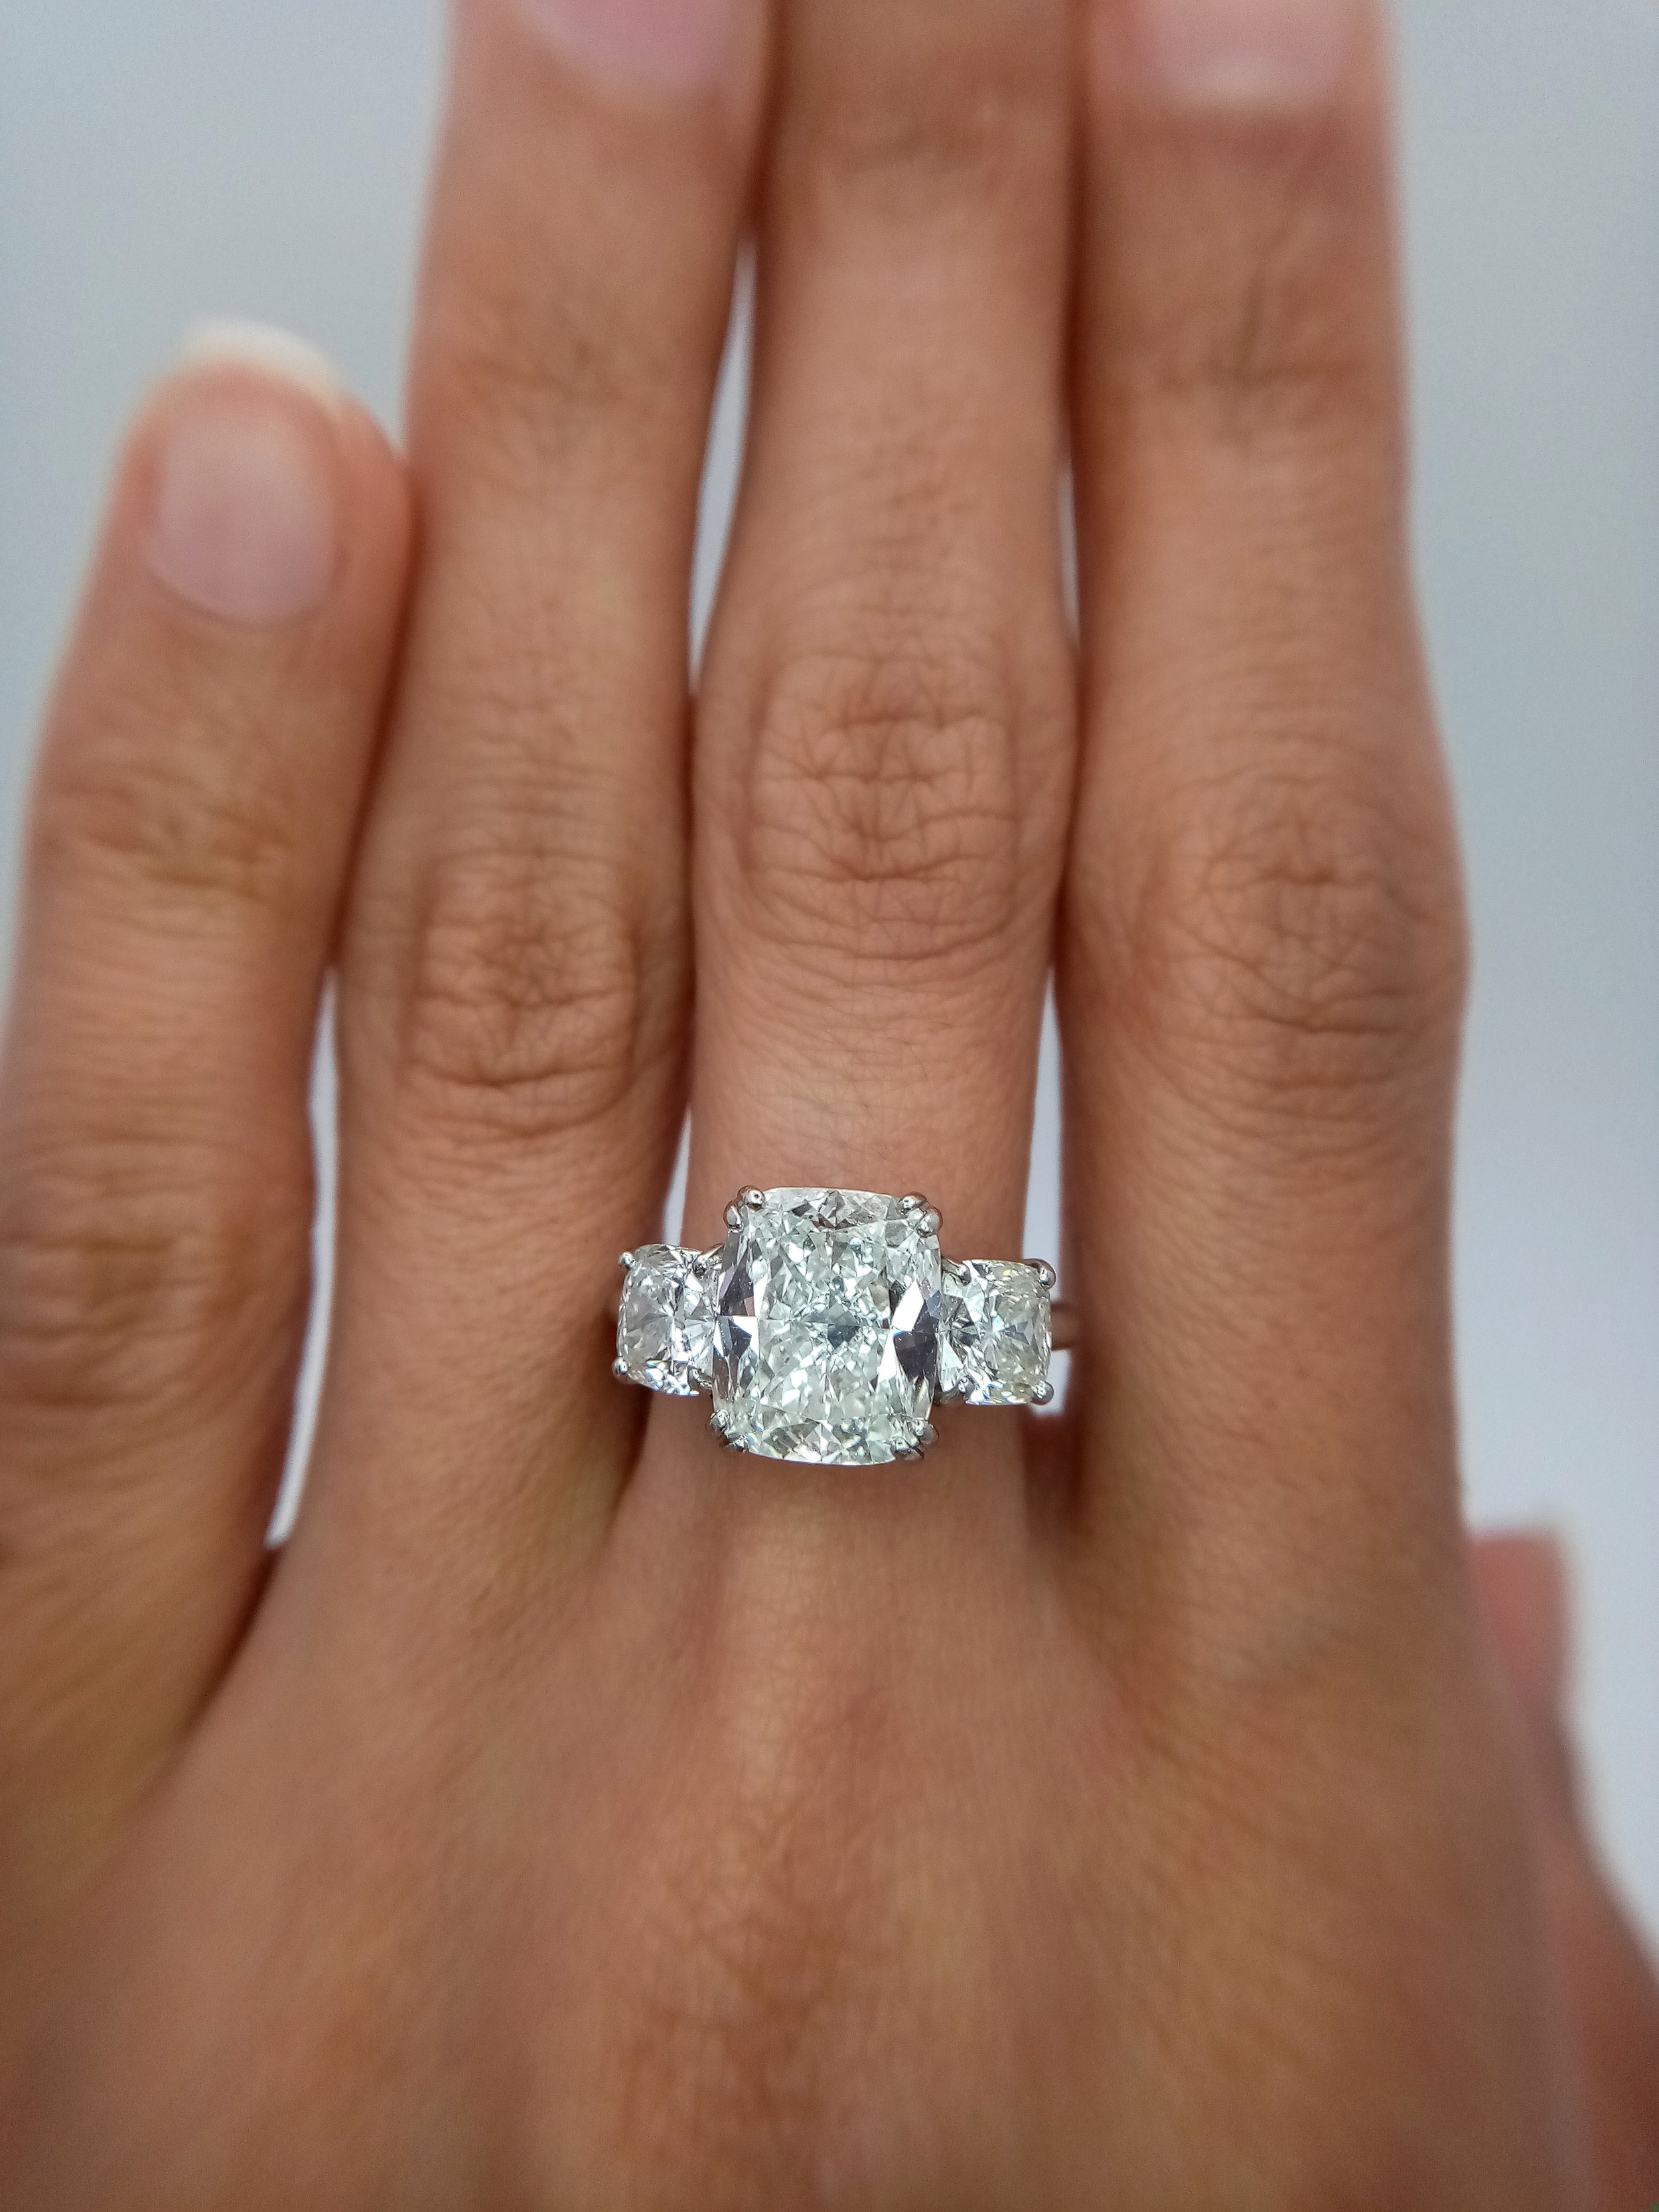 A Breathtaking 4.01ct GIA Certified Diamond Ring. A brilliant cushion cut 4.01ct central diamond - Image 21 of 22